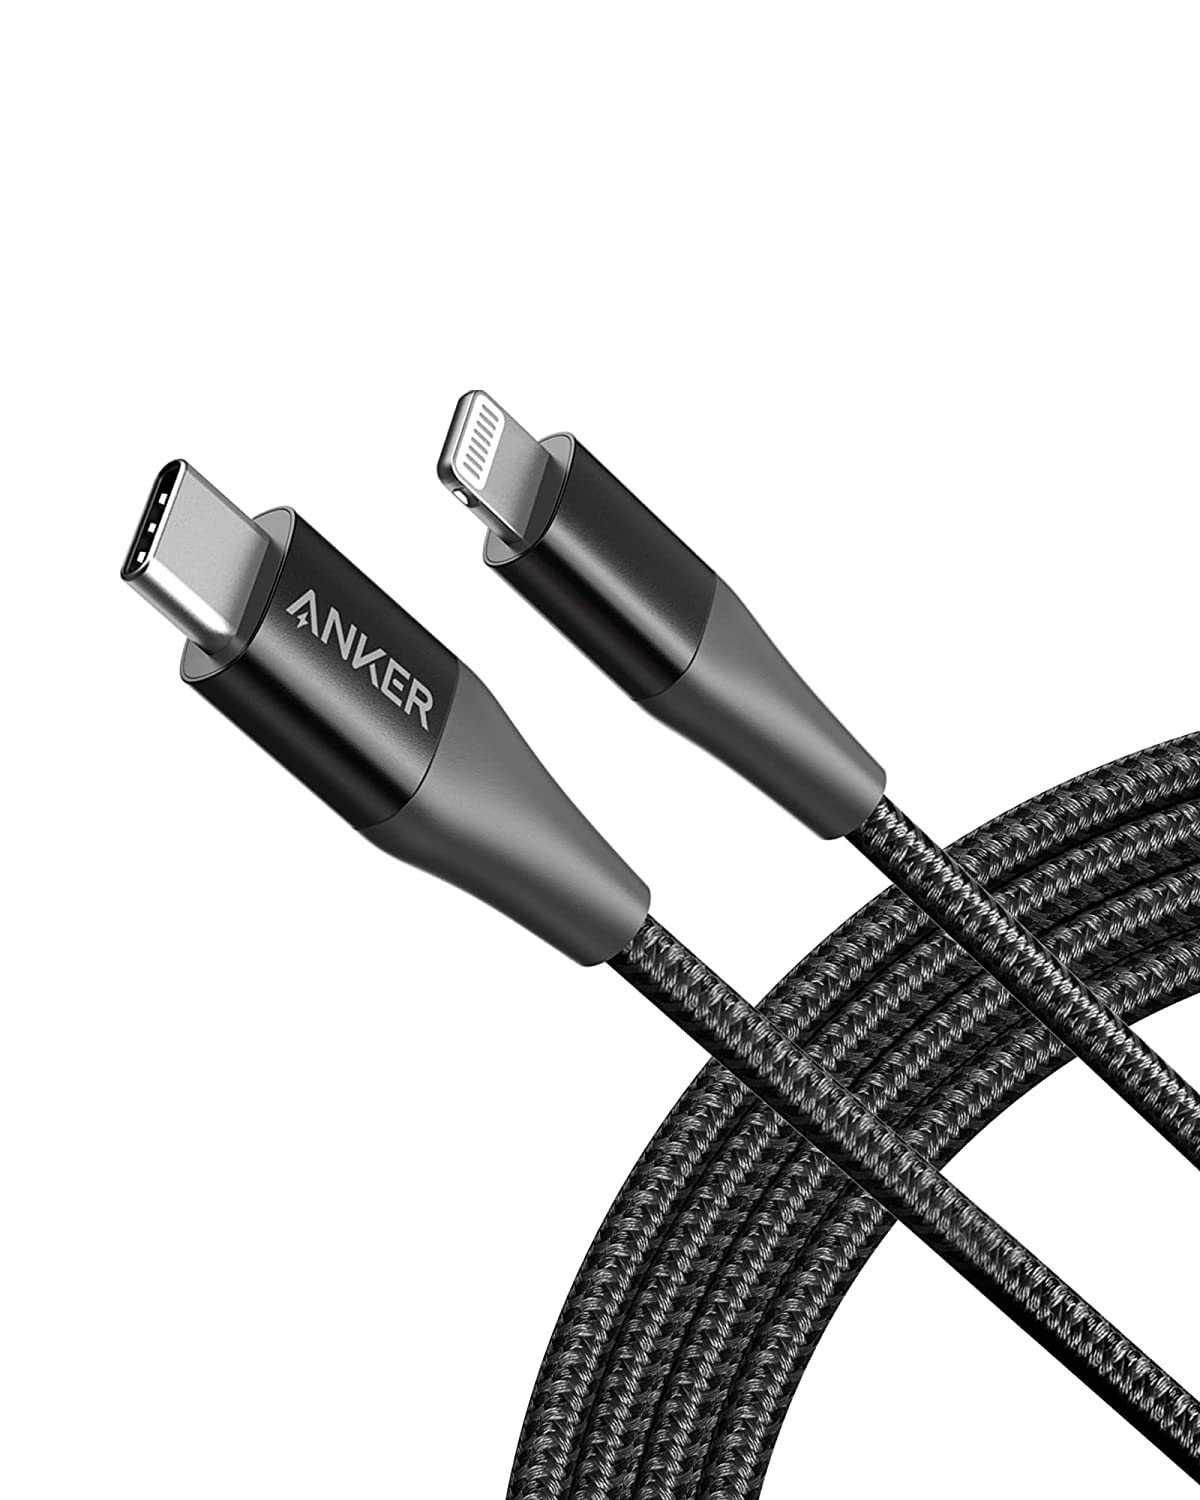 Anker PowerLine +II USB-C Cable with Lightning Connector 6ft - Black